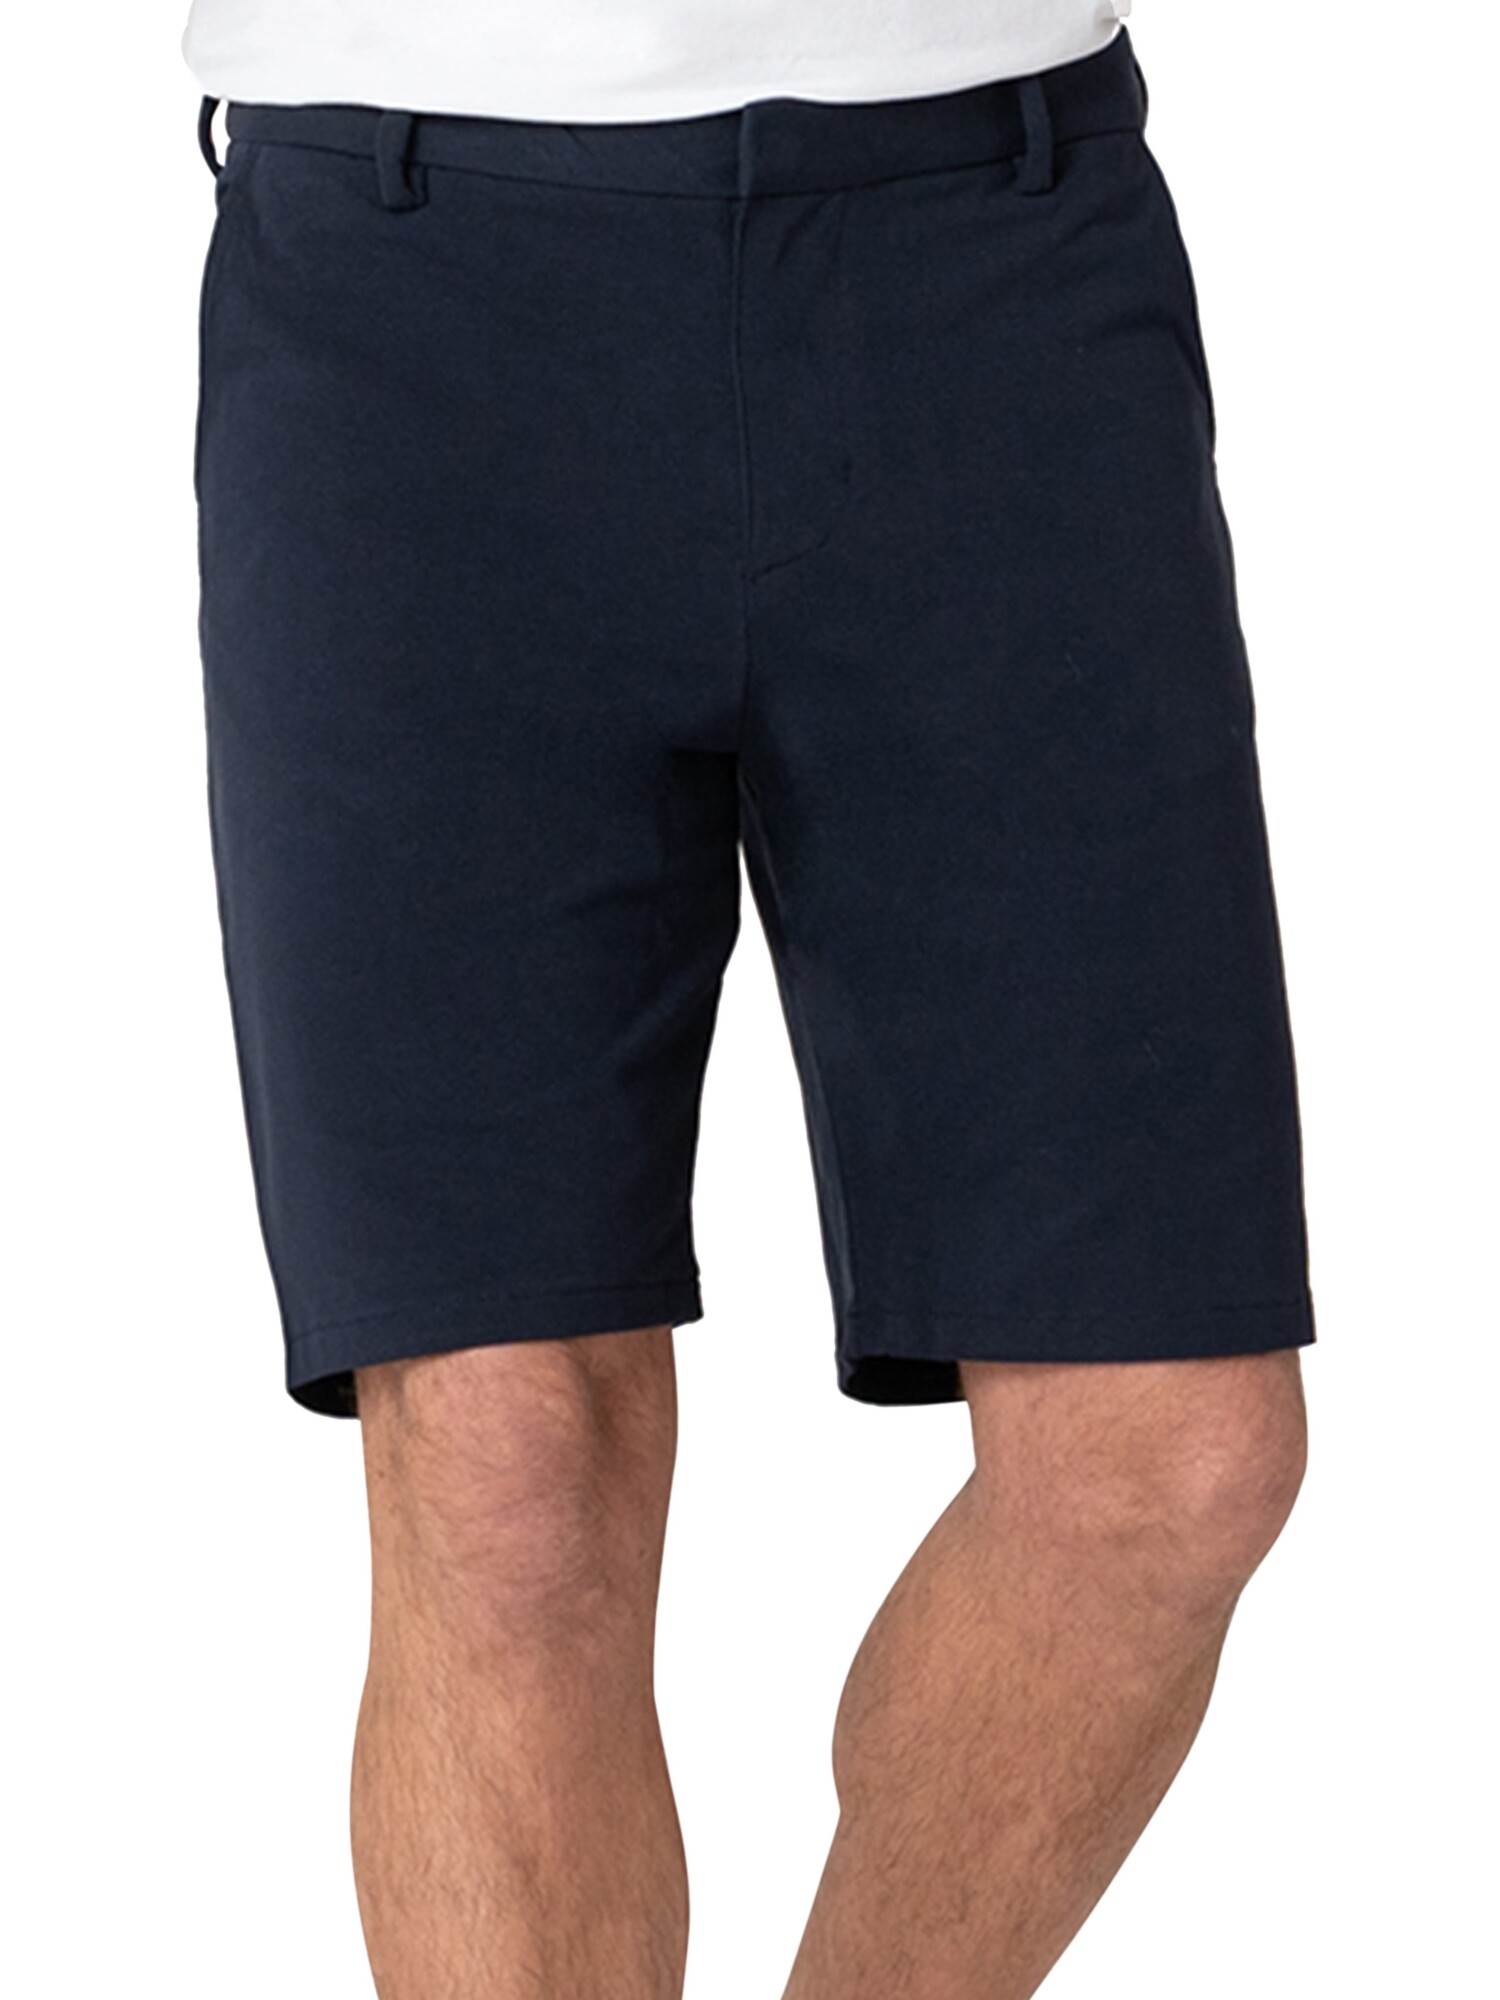 SWEAT TAILOR Mens Navy Stretch Shorts 28